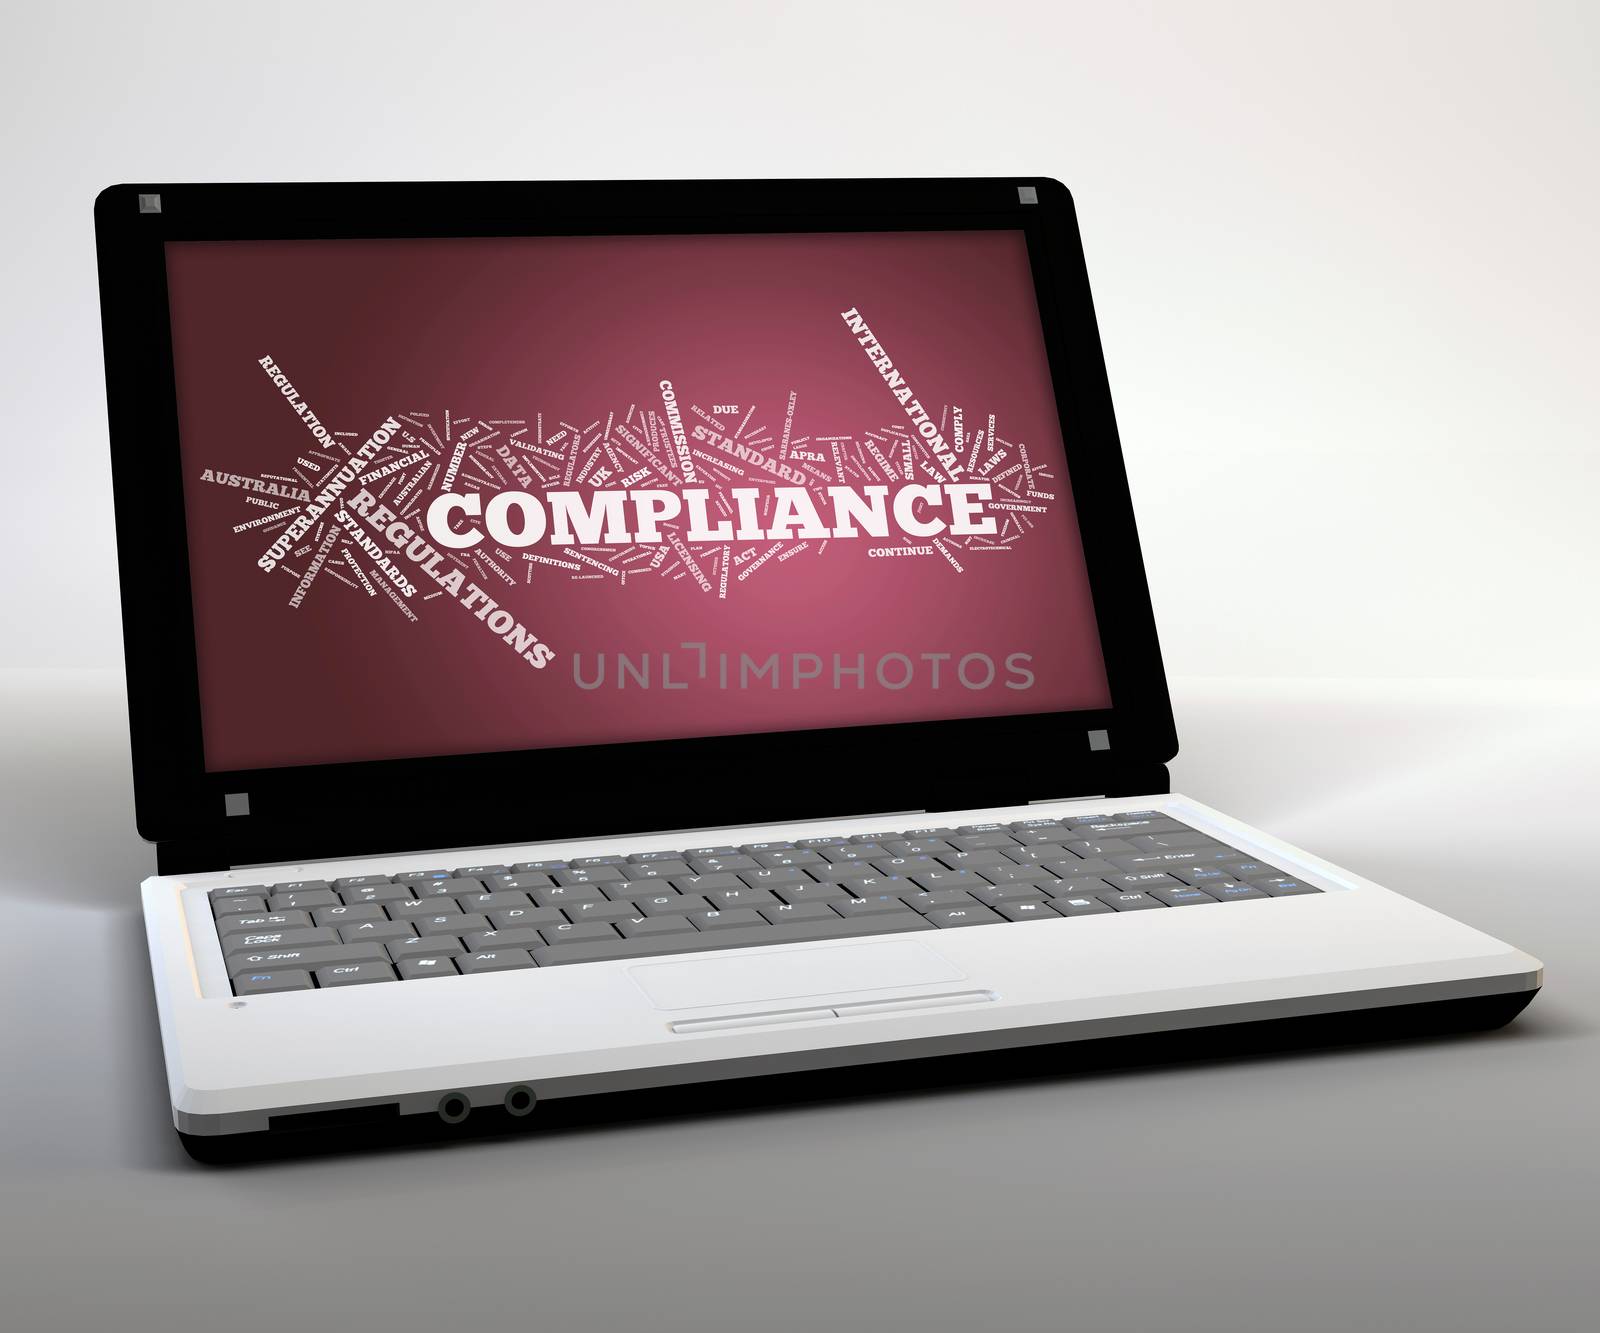 Mobile Thin Client / Netbook "Compliance" by mindscanner